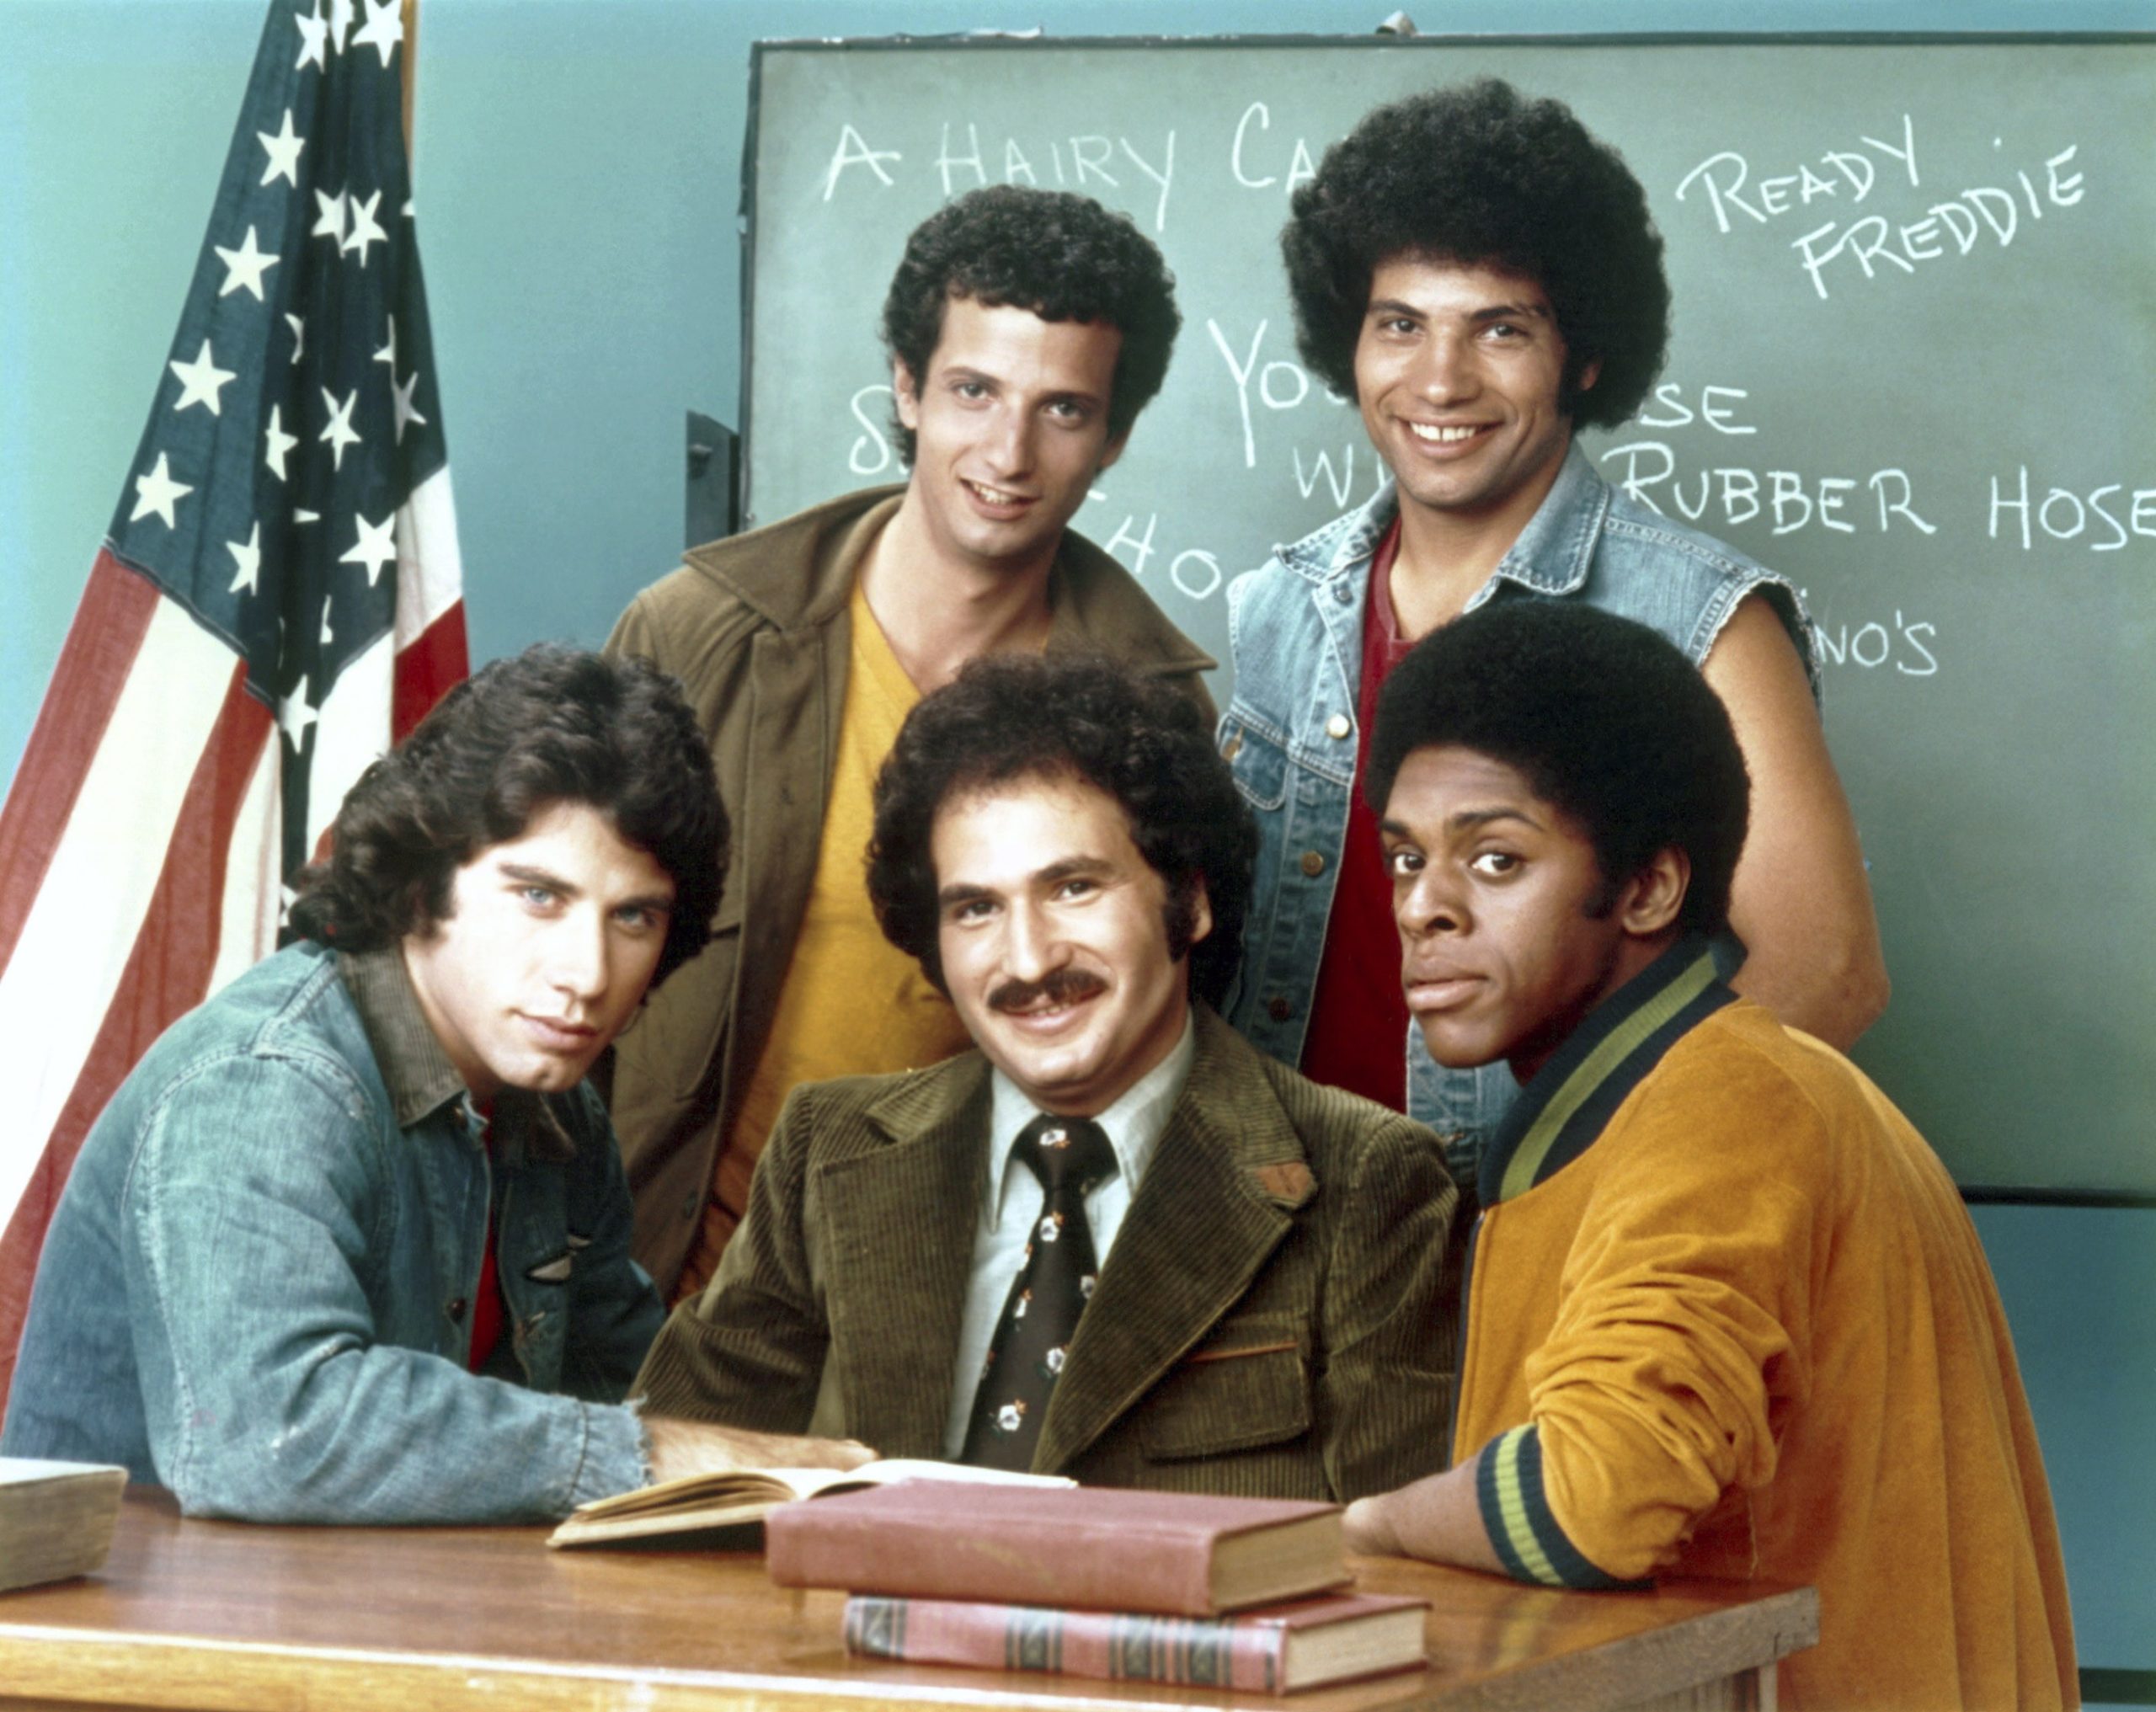 WELCOME BACK, KOTTER, standing from left: Ron Palillo, Robert Hegyes, front from left: John Travolta